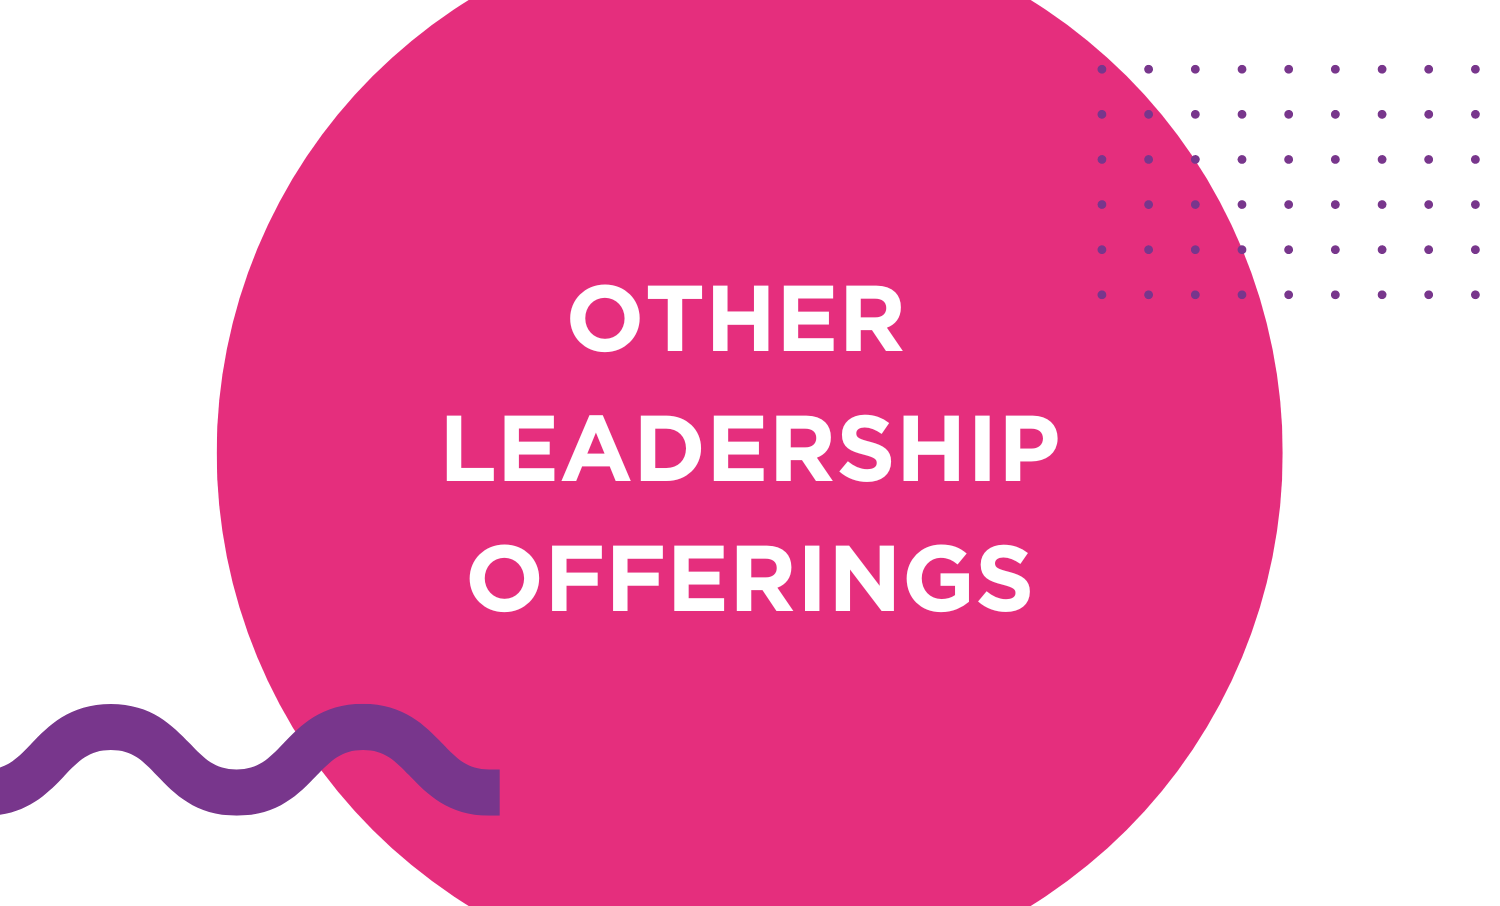 Other Leadership Offerings inside pink circle